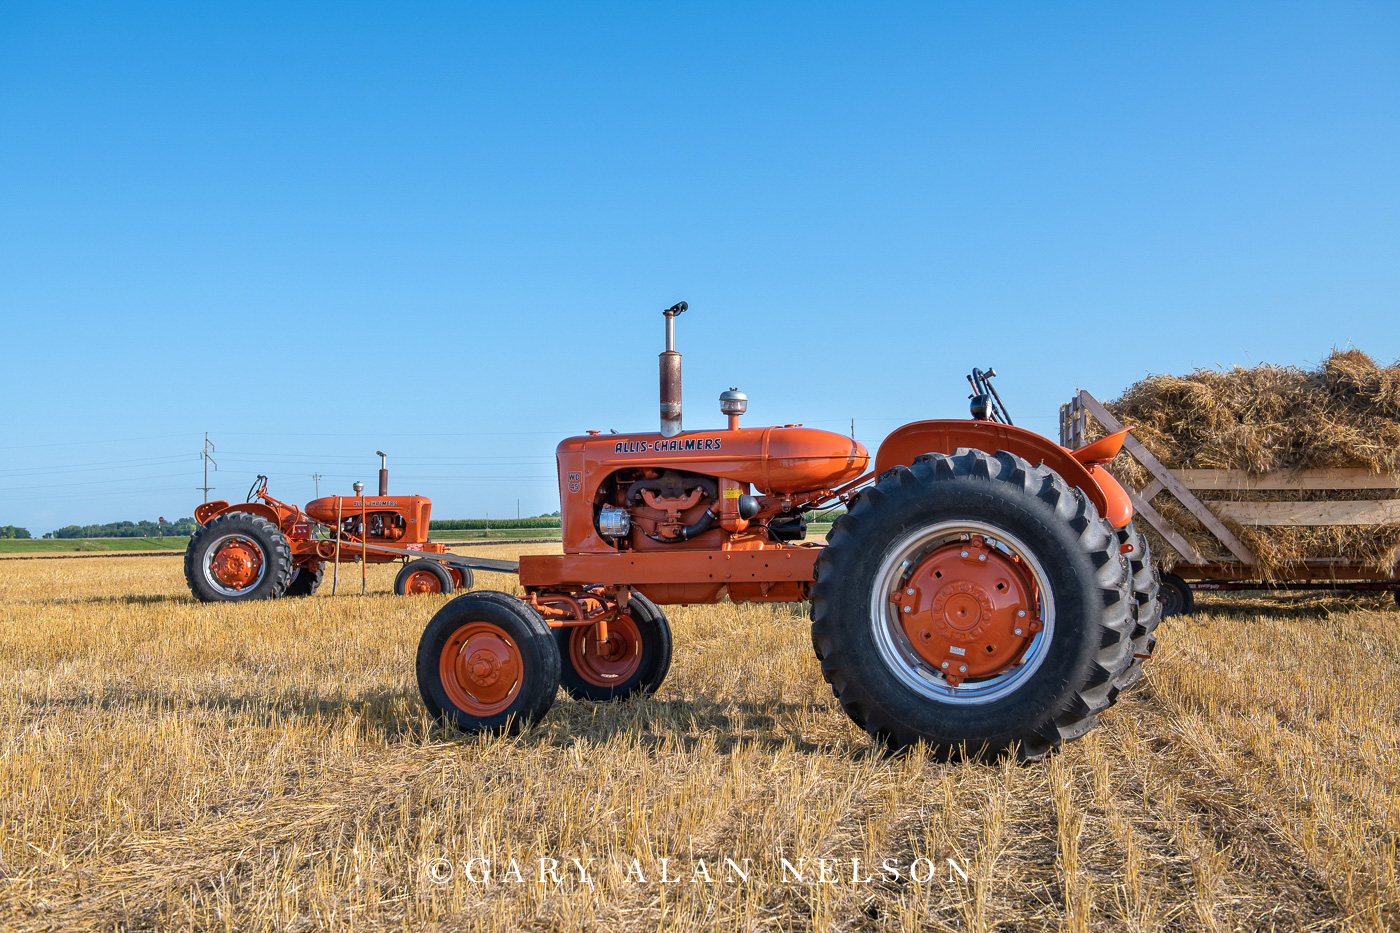 1955 Allis-Chalmers Model WD-45 with 1951 Allis-Chalmers WD in background.